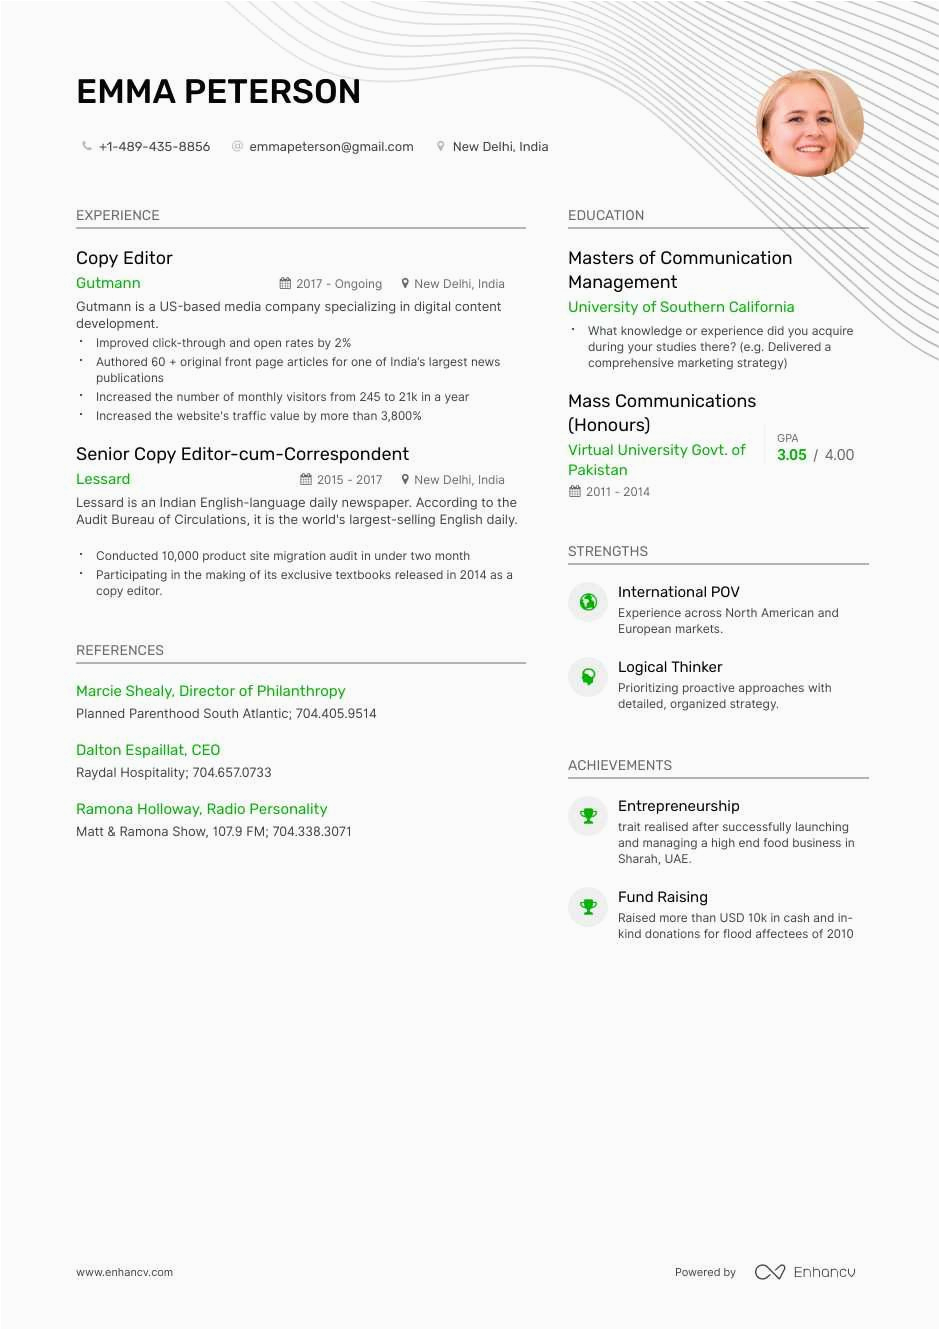 Sample Resume for Experienced Copy Editor Copy Editor Resume Example and Guide for 2019